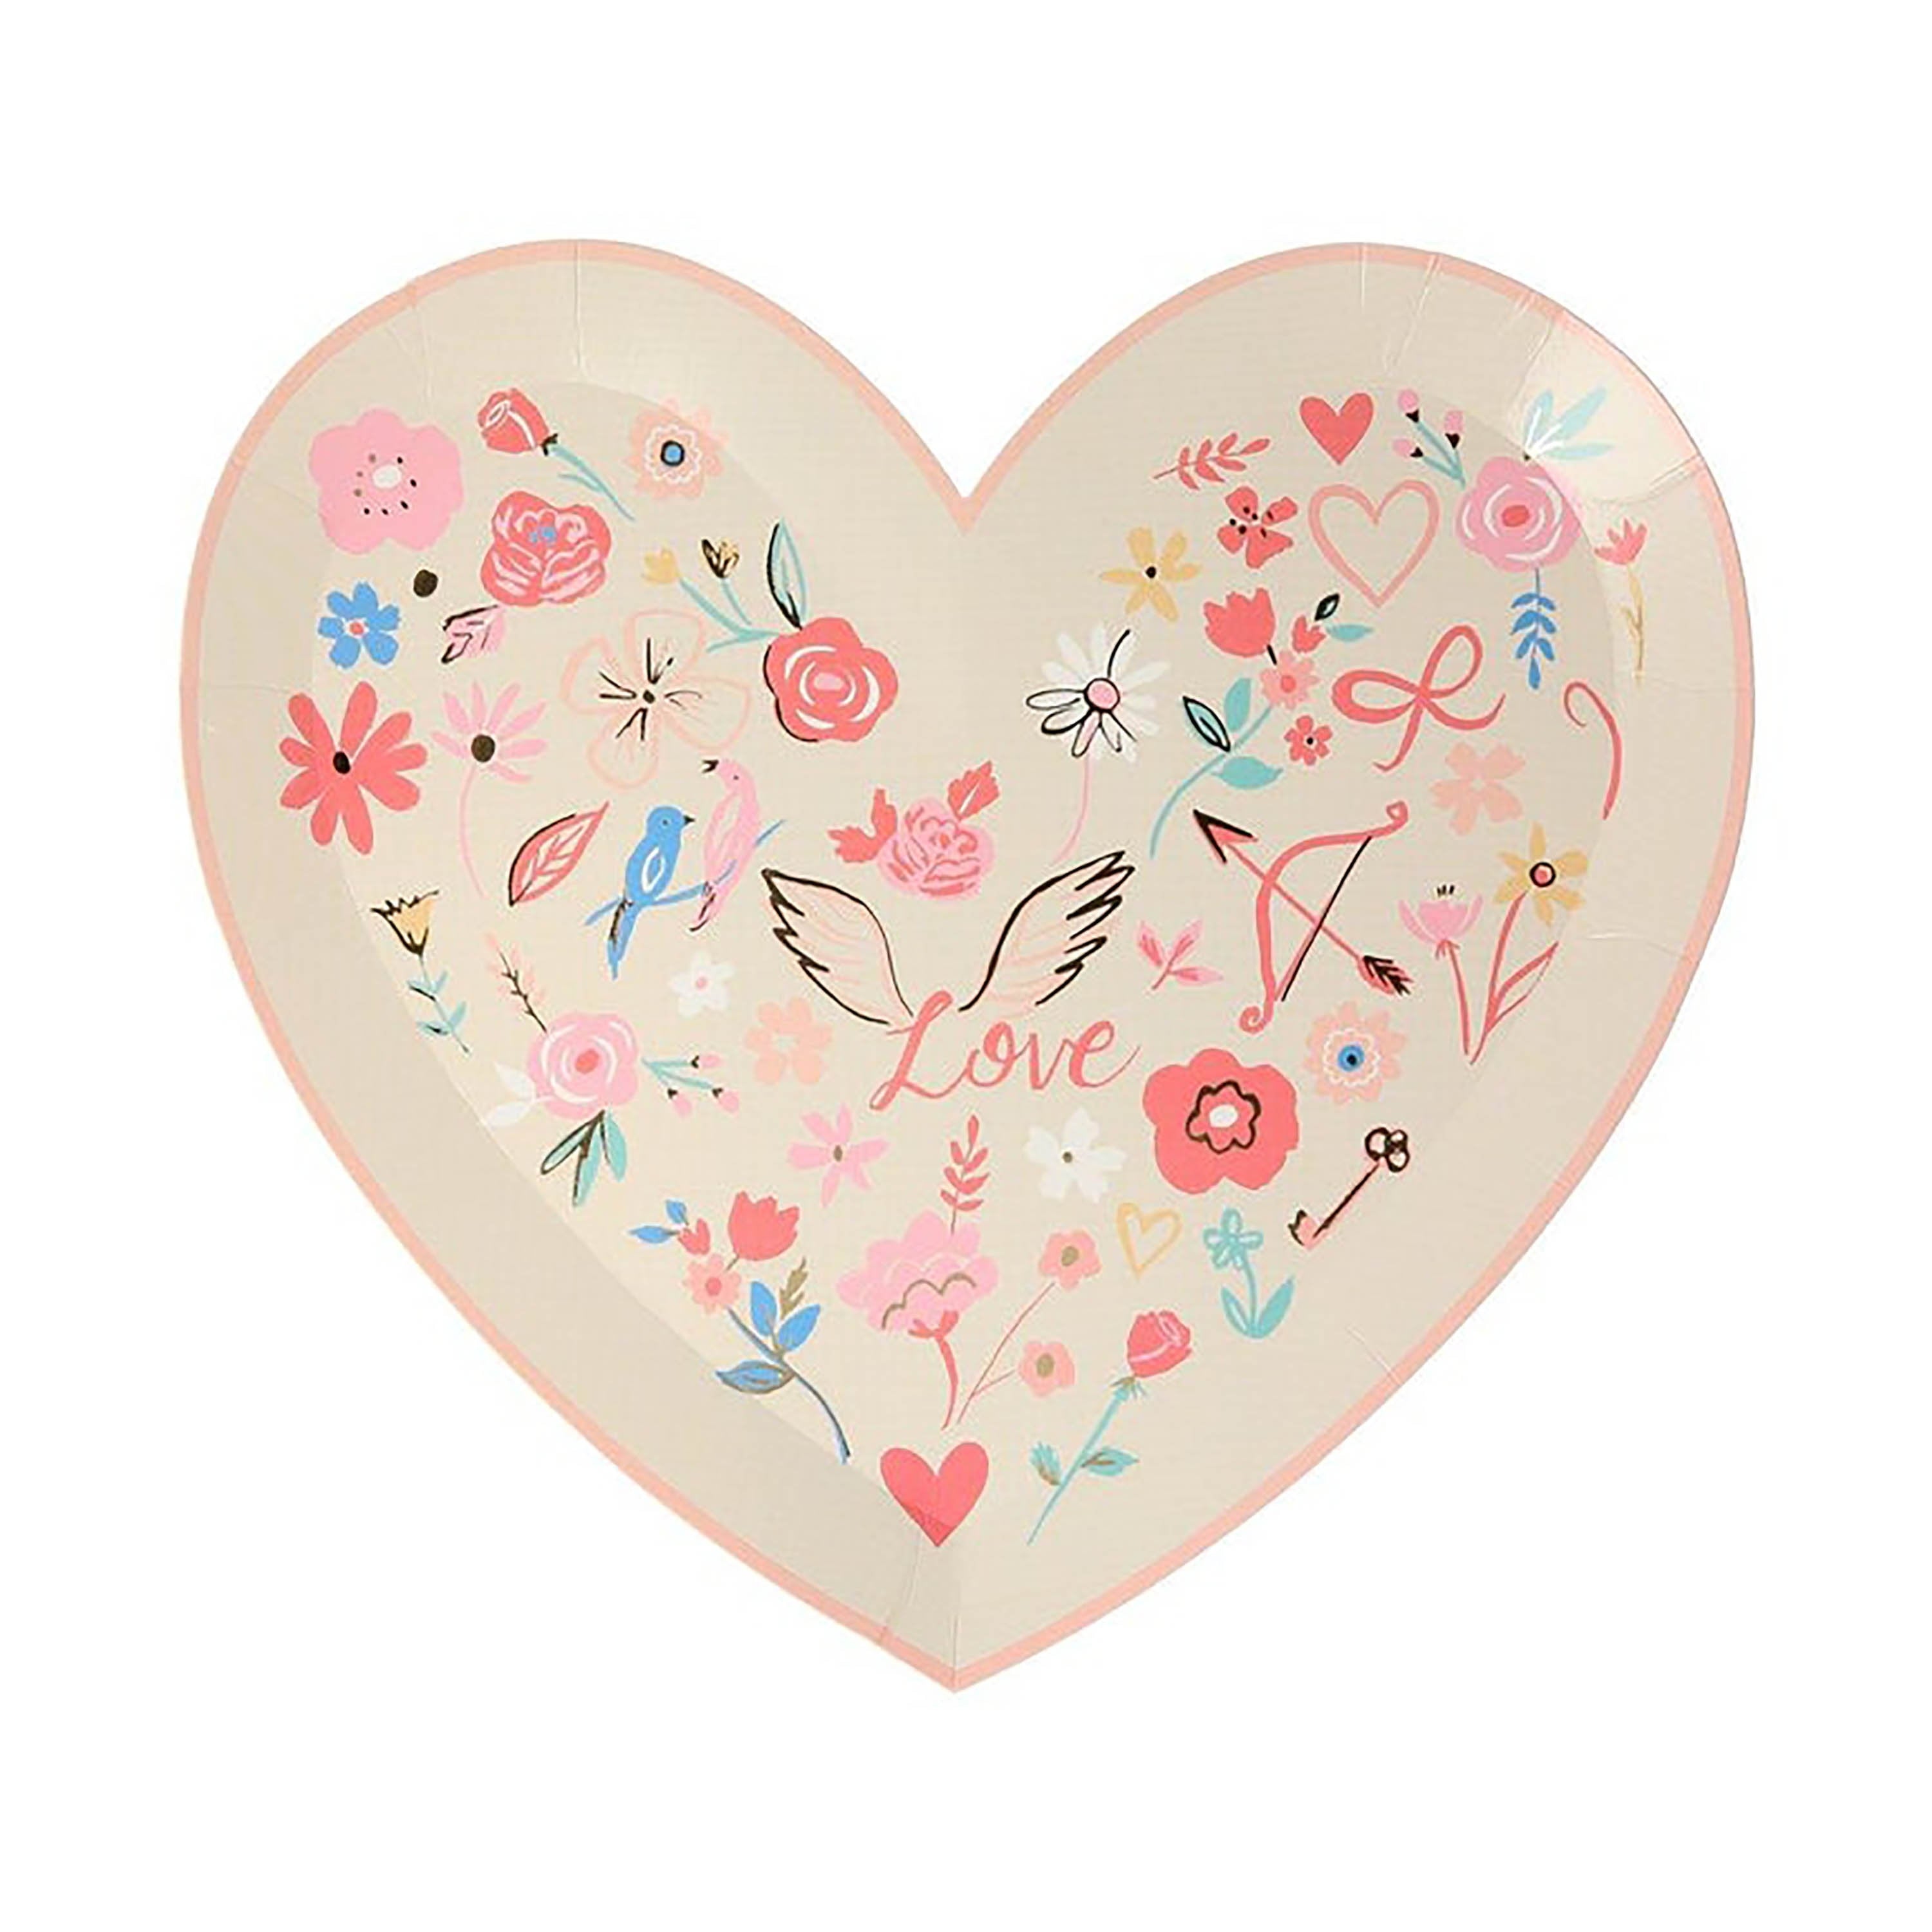 Heart Shaped Plate | Valentine Plate - Heart Plate - Candy Heart Message - Valentine Party Decor - Valentine Theme Party - Kiss Me - Be Mine